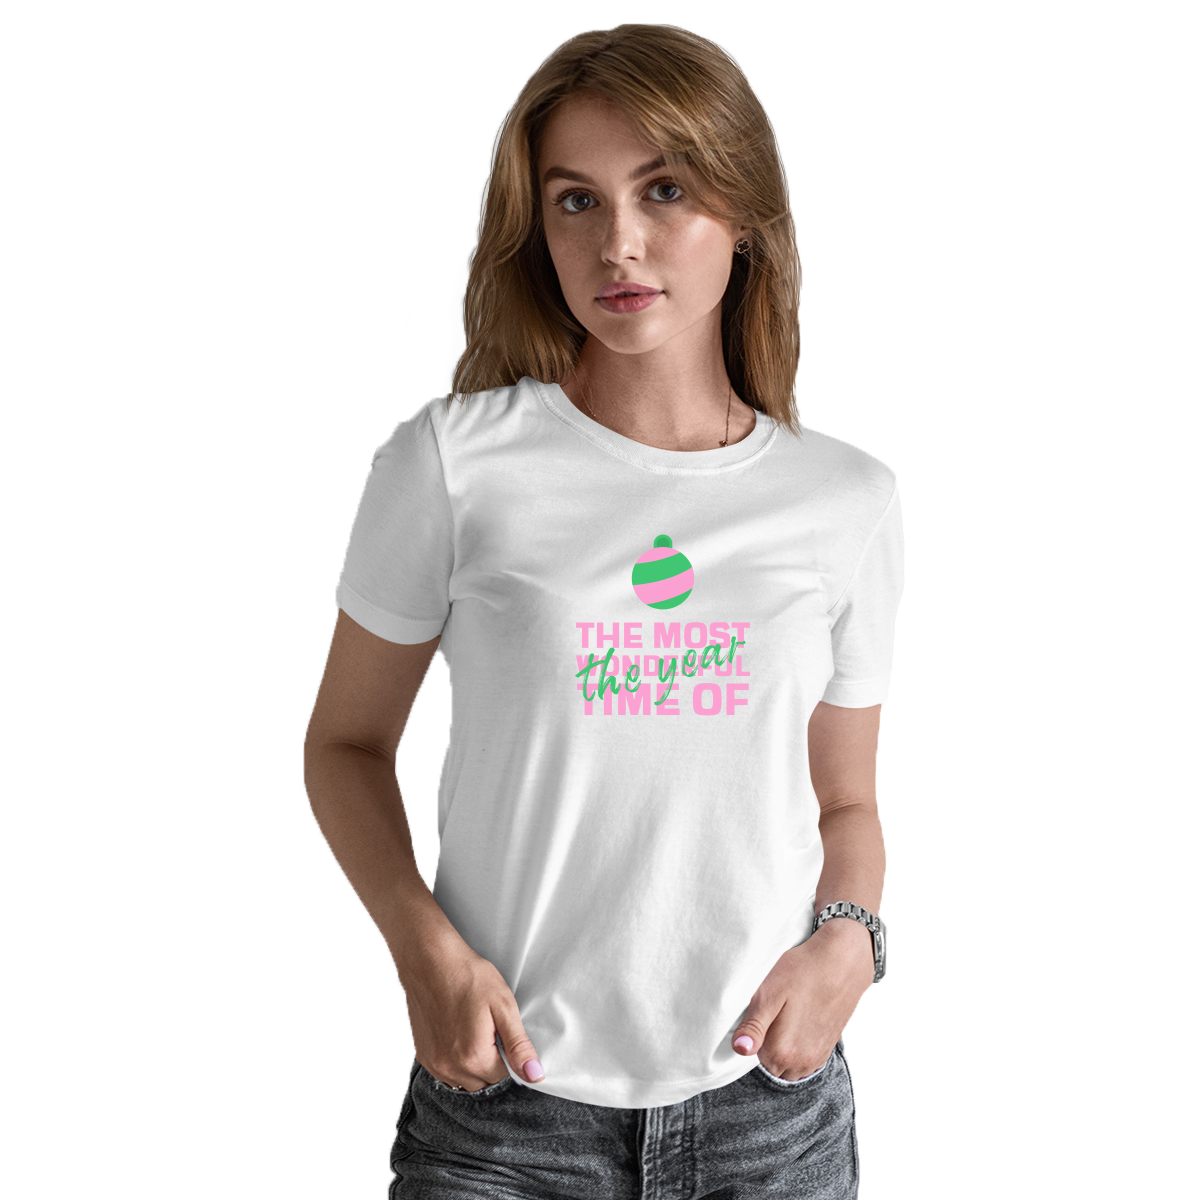 The Most Wonderful Time of the Year Women's T-shirt | White